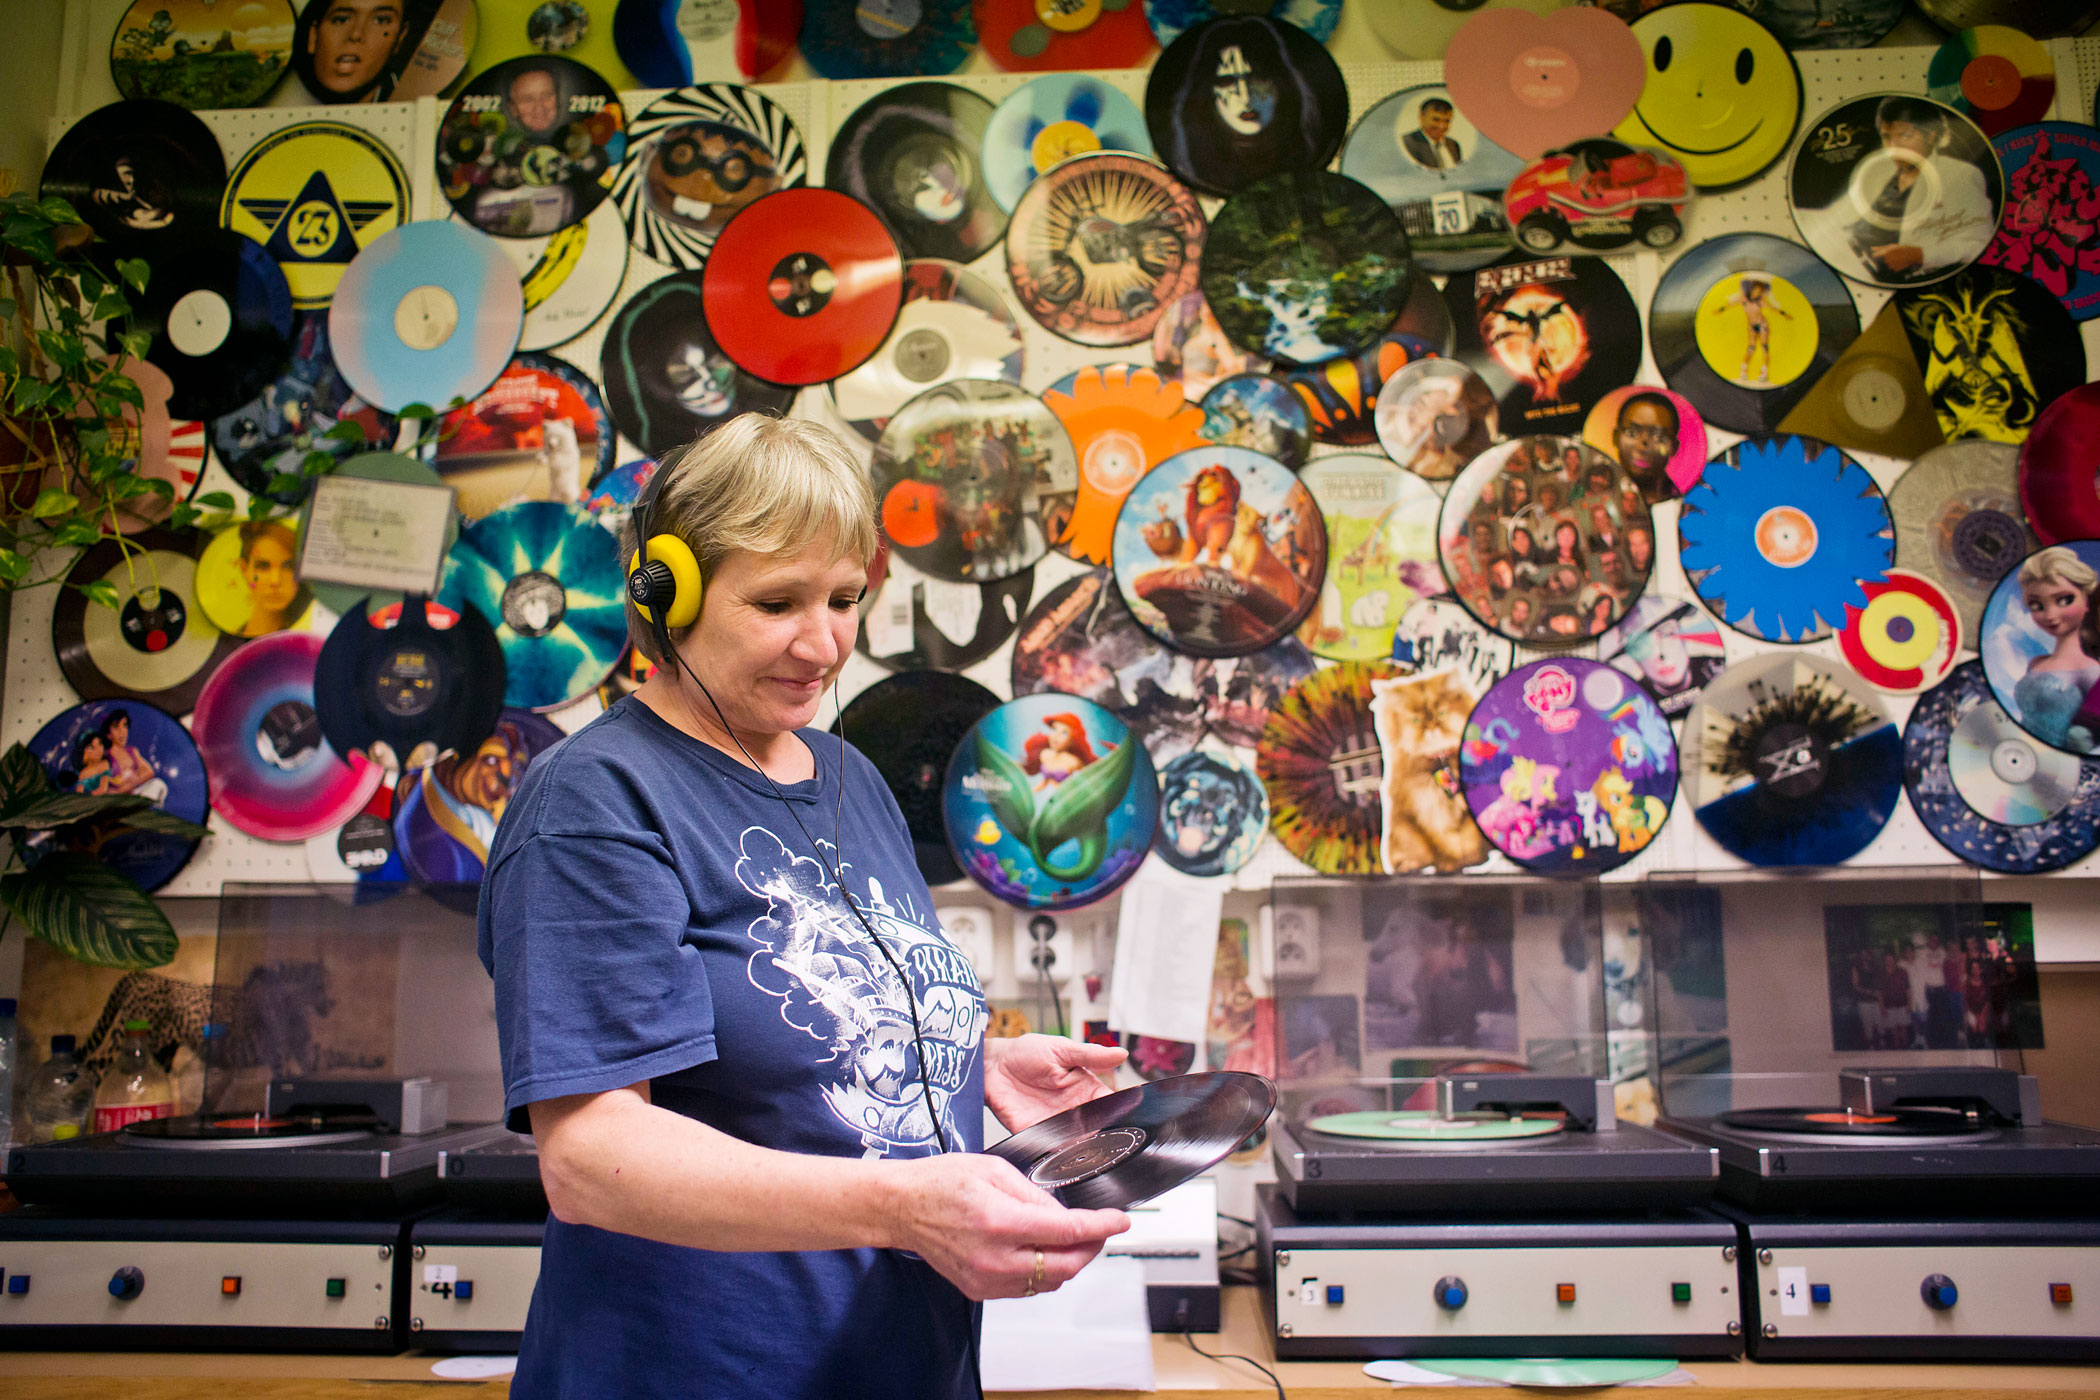 A worker listens through headphones and checks the sound quality of 12" inch vinyl records before they are dispatched, after being manufactured by GZ Media a.s. at their plant in Lodenice, Czech Republic, on Nov. 25, 2014. (Martin Divisek—Bloomberg/Getty Images)